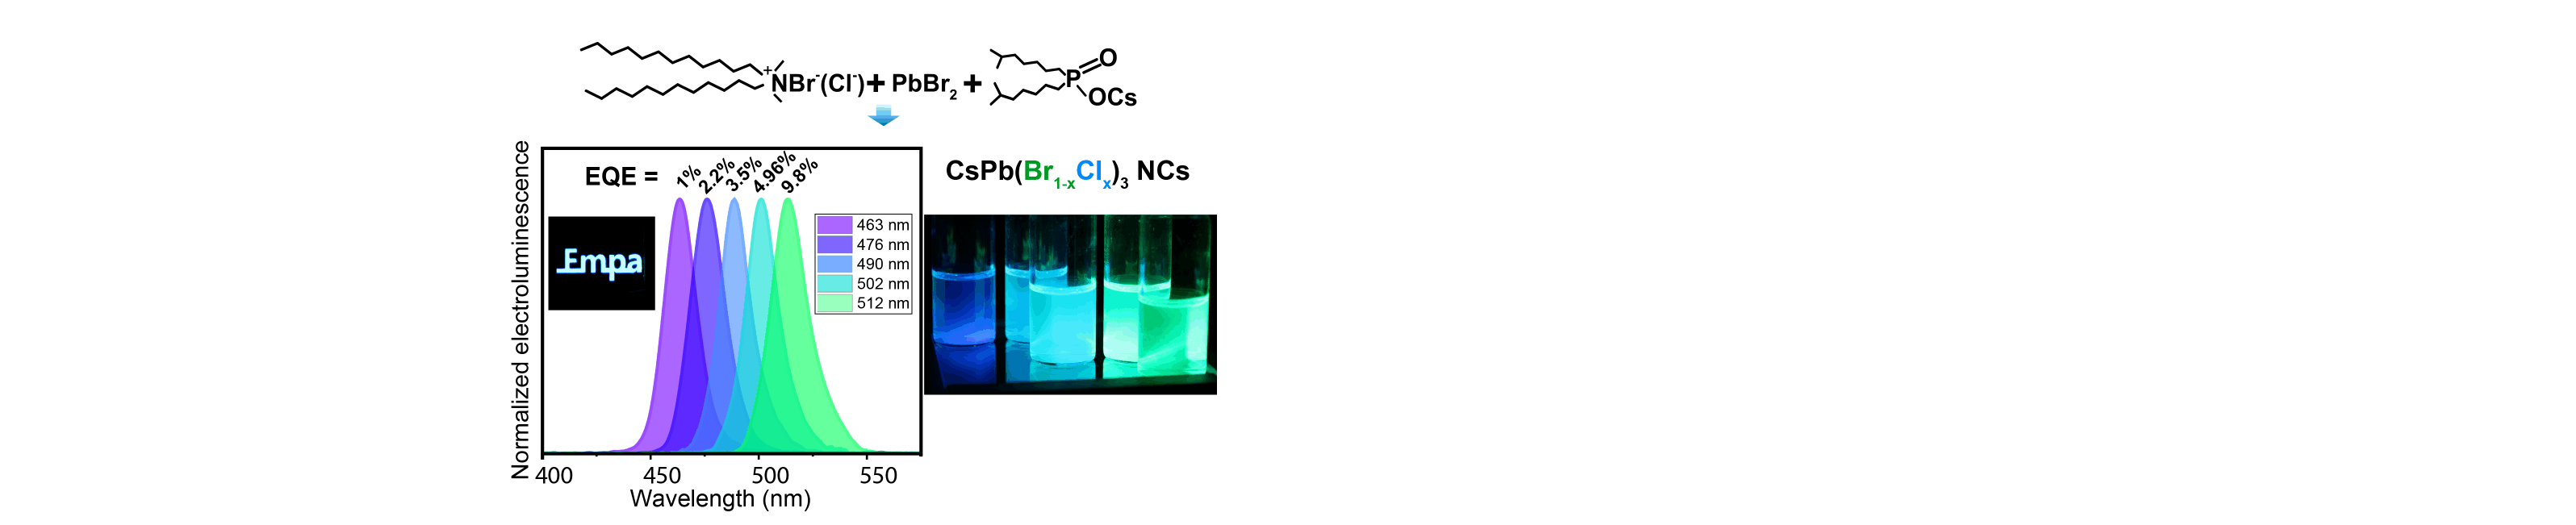 Direct Synthesis of Quaternary Alkylammonium Capped Perovskite Nanocrystals for Efficient Blue and Green Light-Emitting Diodes